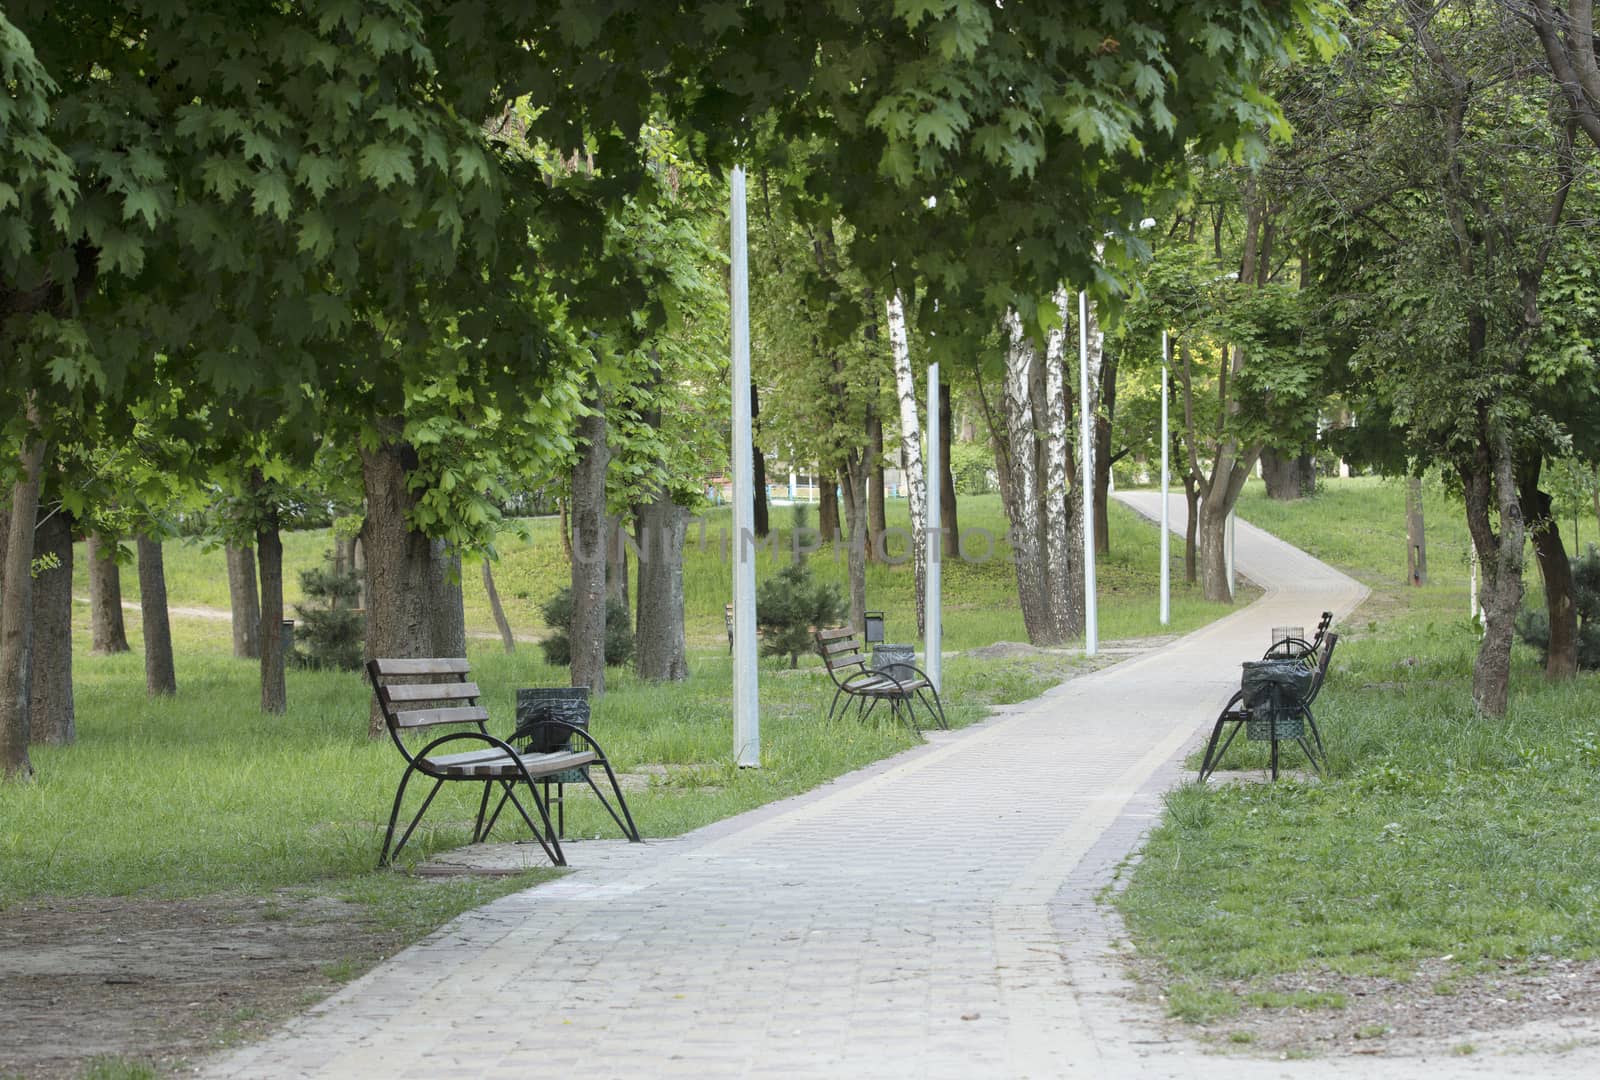 Wooden benches in the city summer park along the cobbled path